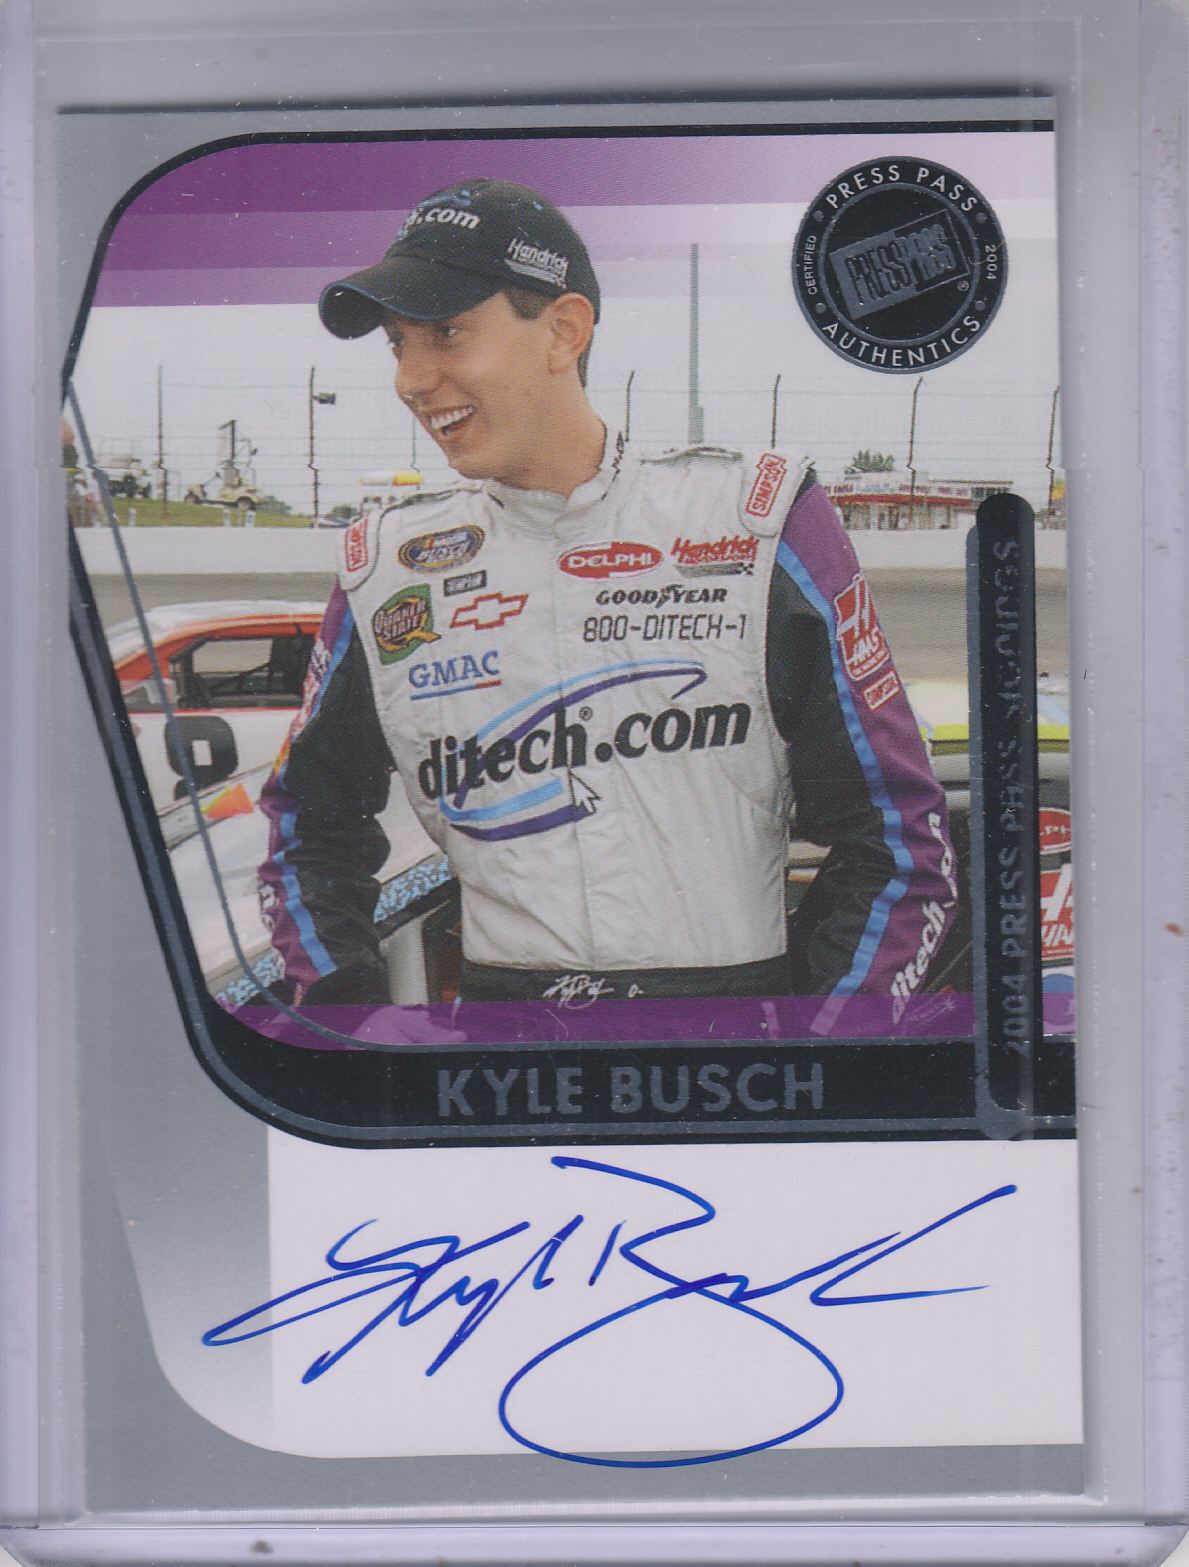 2004 Press Pass Signings #10 Kyle Busch O/P/S/T/V